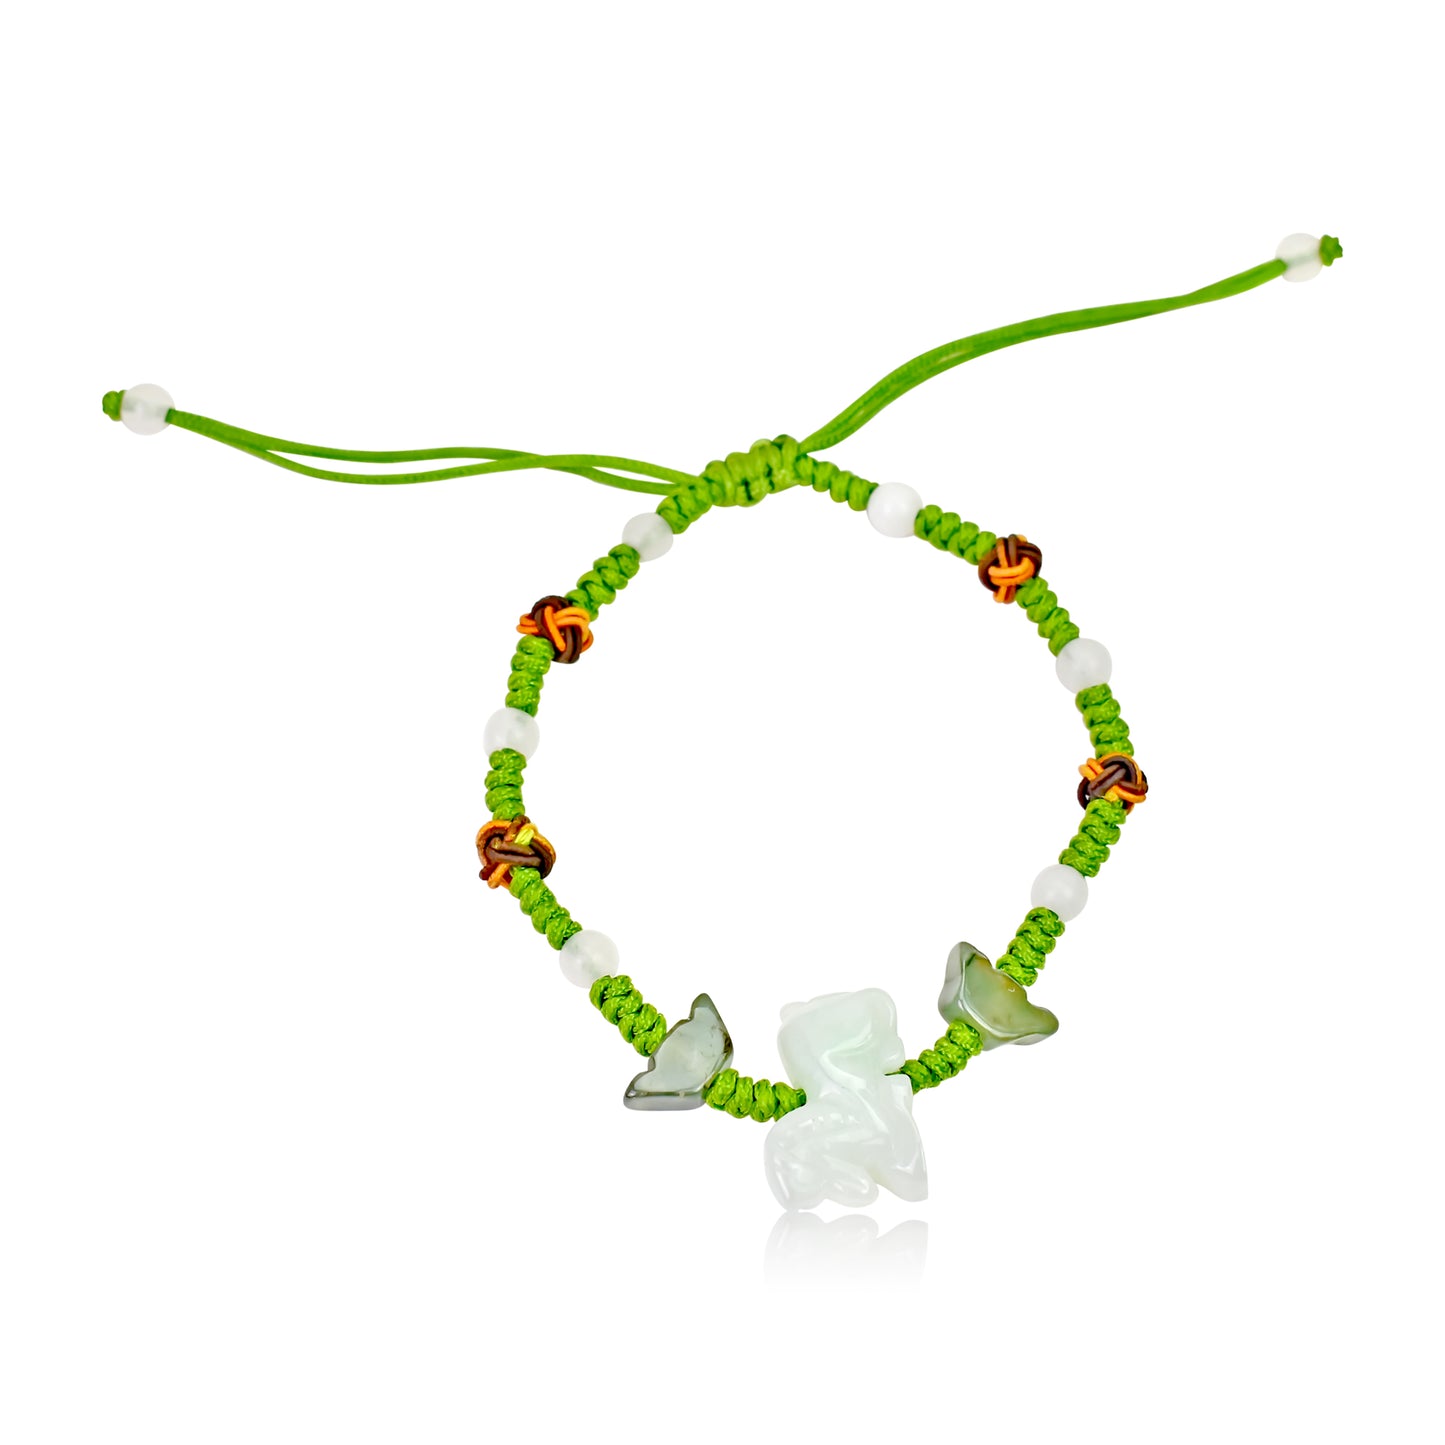 Show Your Sheep Personality with a Handmade Jade Bracelet made with Lime Cord